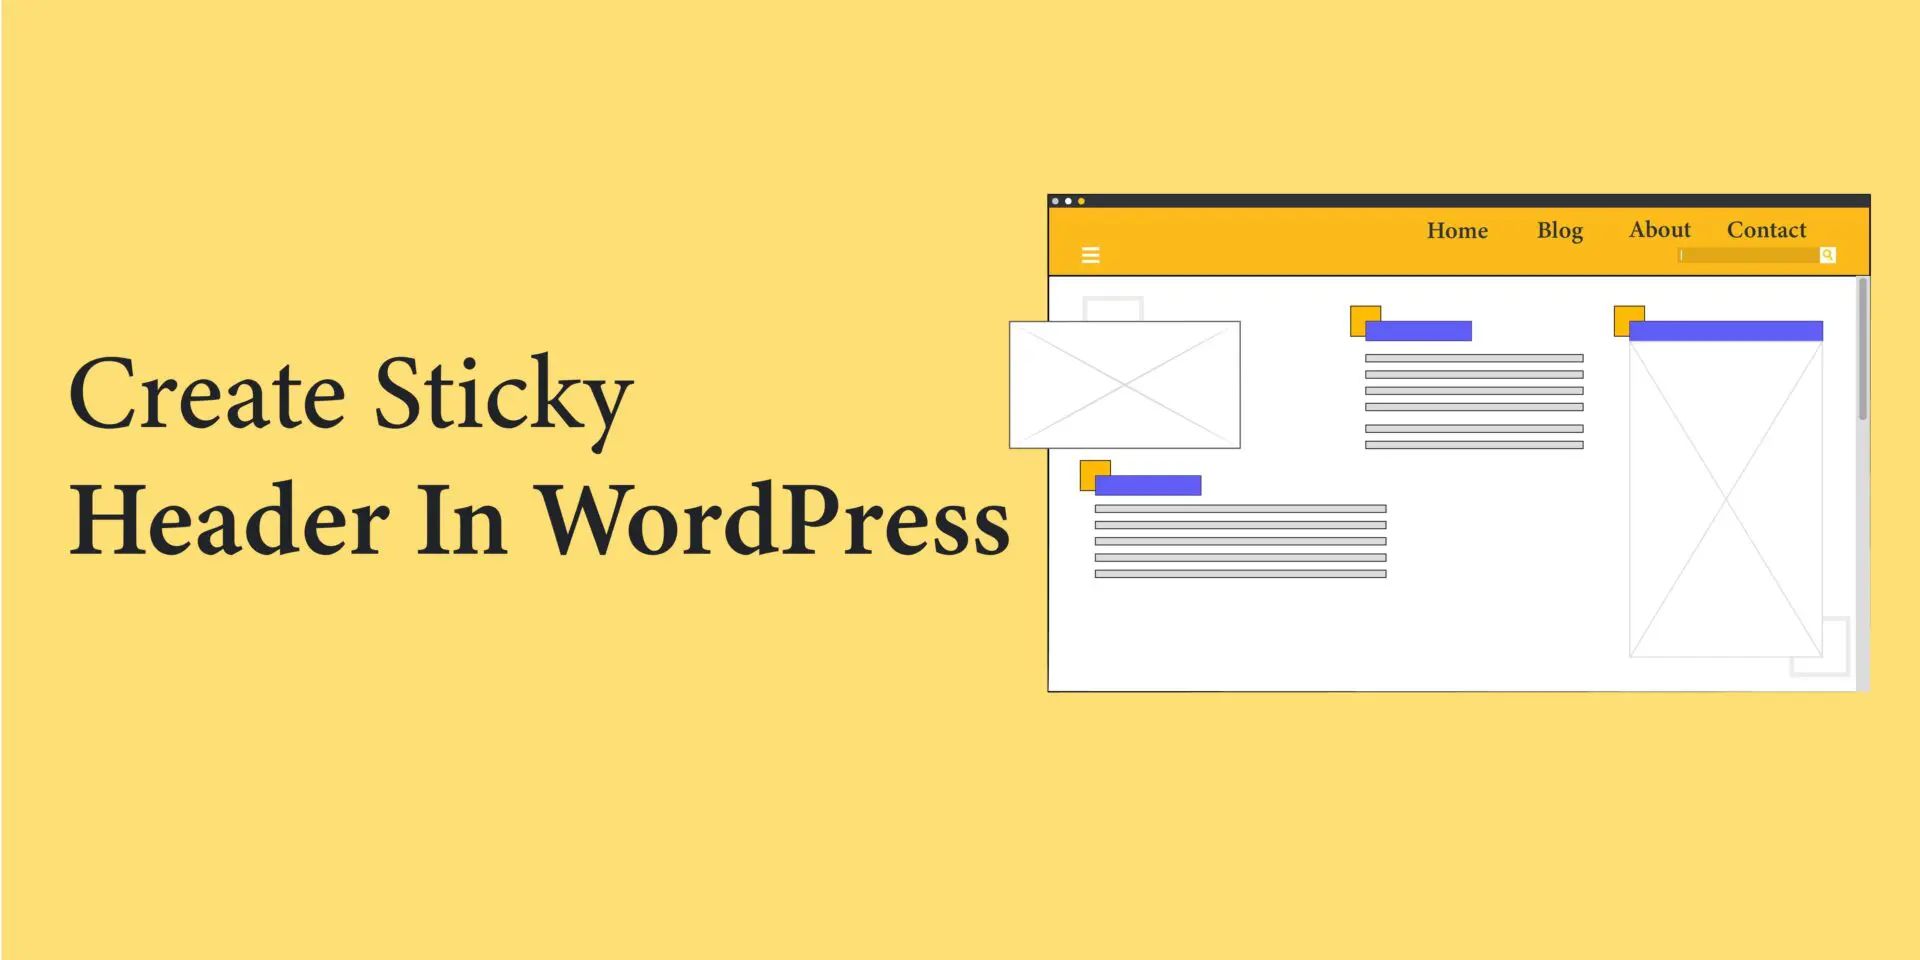 How to Create a Sticky Header in WordPress